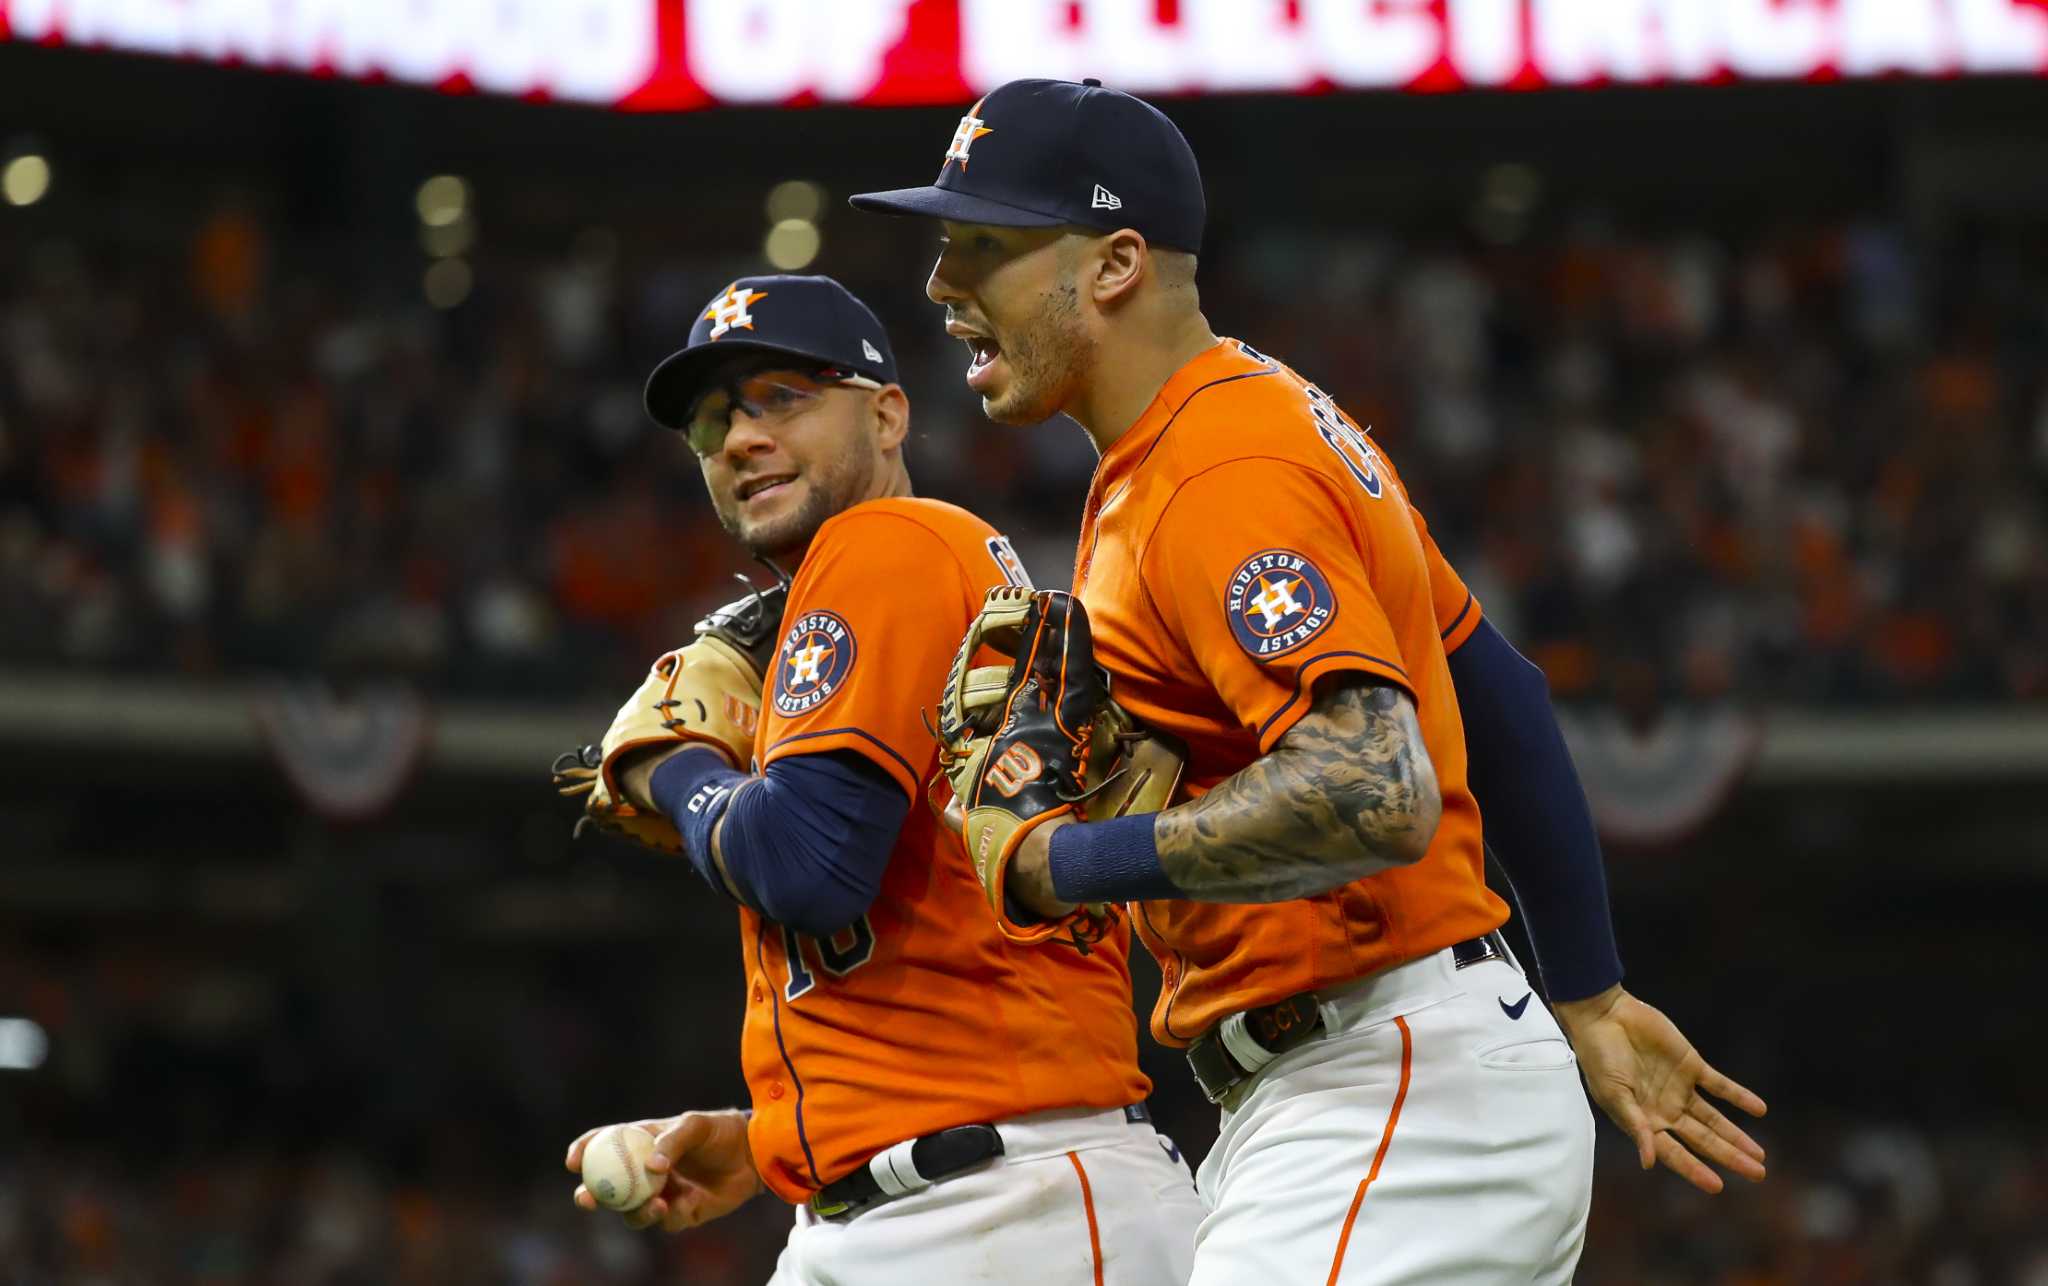 Carlos Correa played with Yuli Gurriel's hair in the dugout after Gurriel's  double, and it was precious